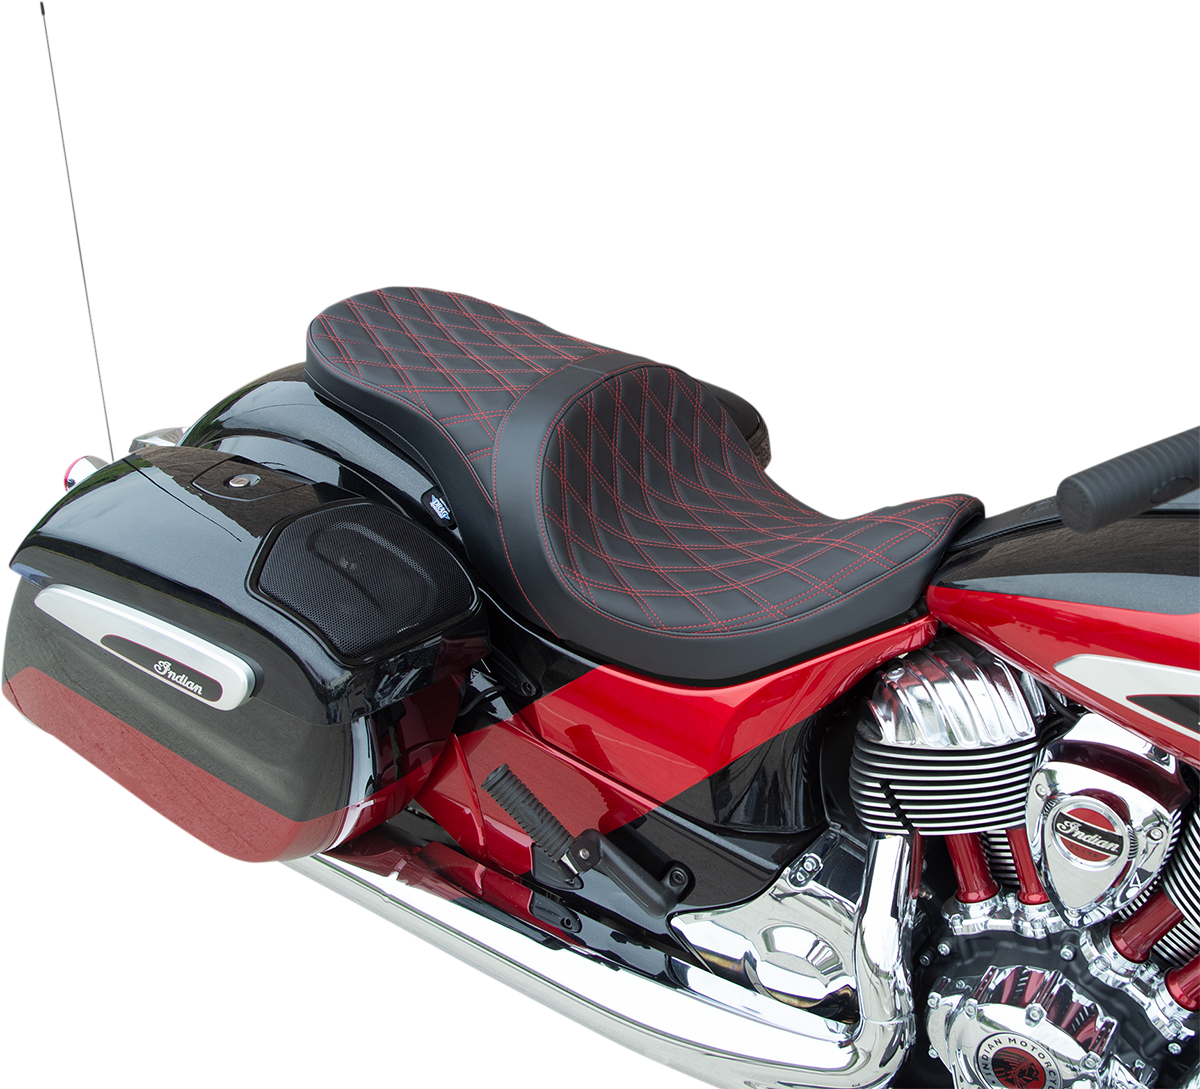 DRAG SPECIALTIES Low Profile Touring Seat - Double Diamond - Red Stitch - Solar Reflective - Indian '14-'22 0810-2276